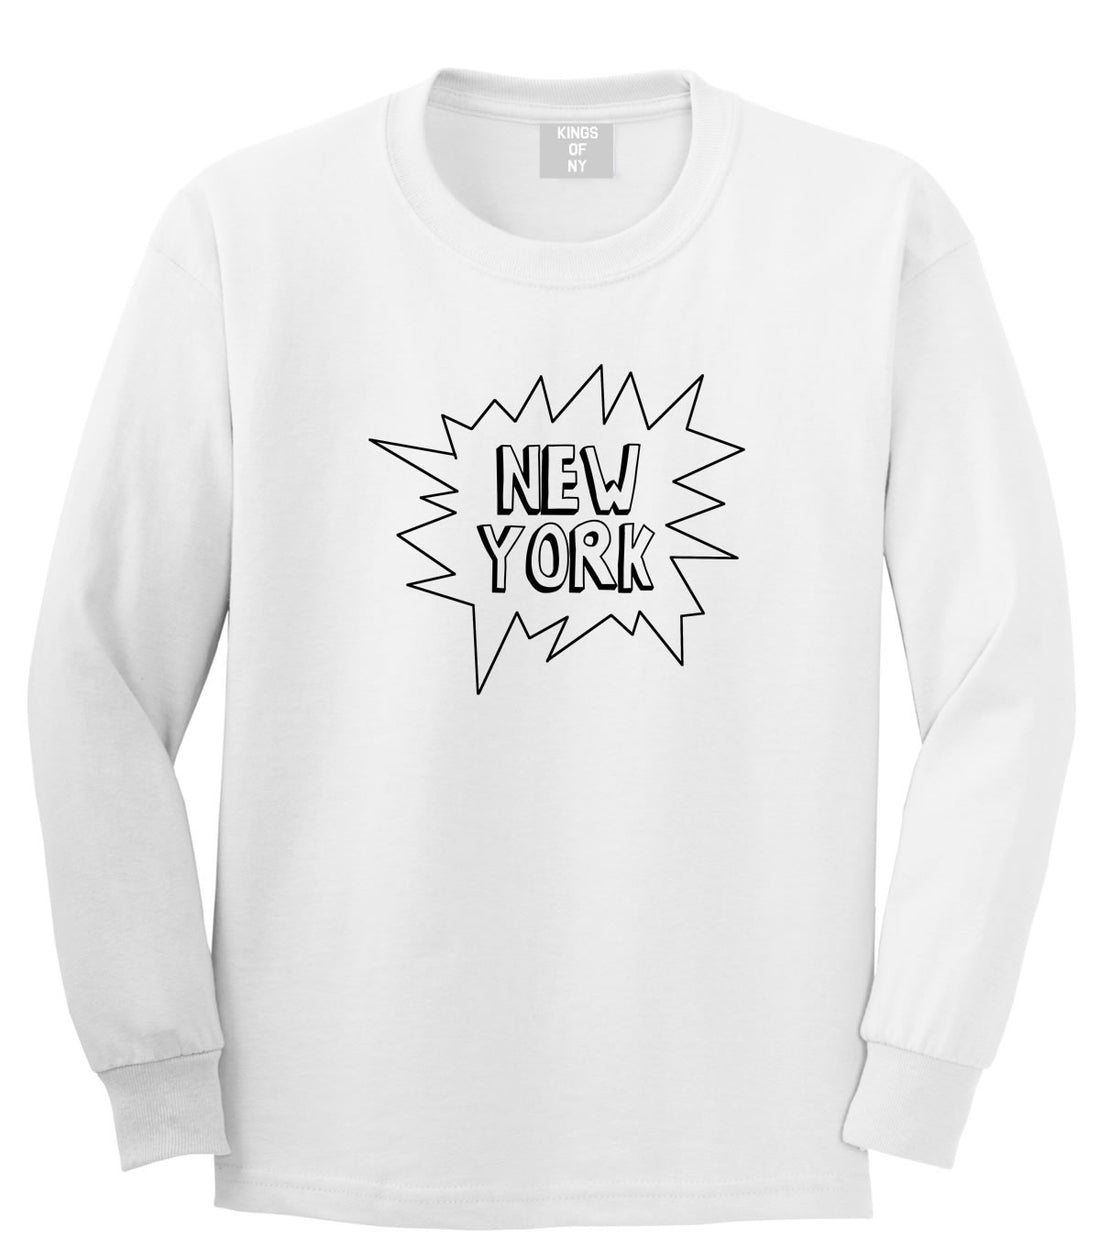 Kings Of NY New York Bubble Quote Long Sleeve T-Shirt in White